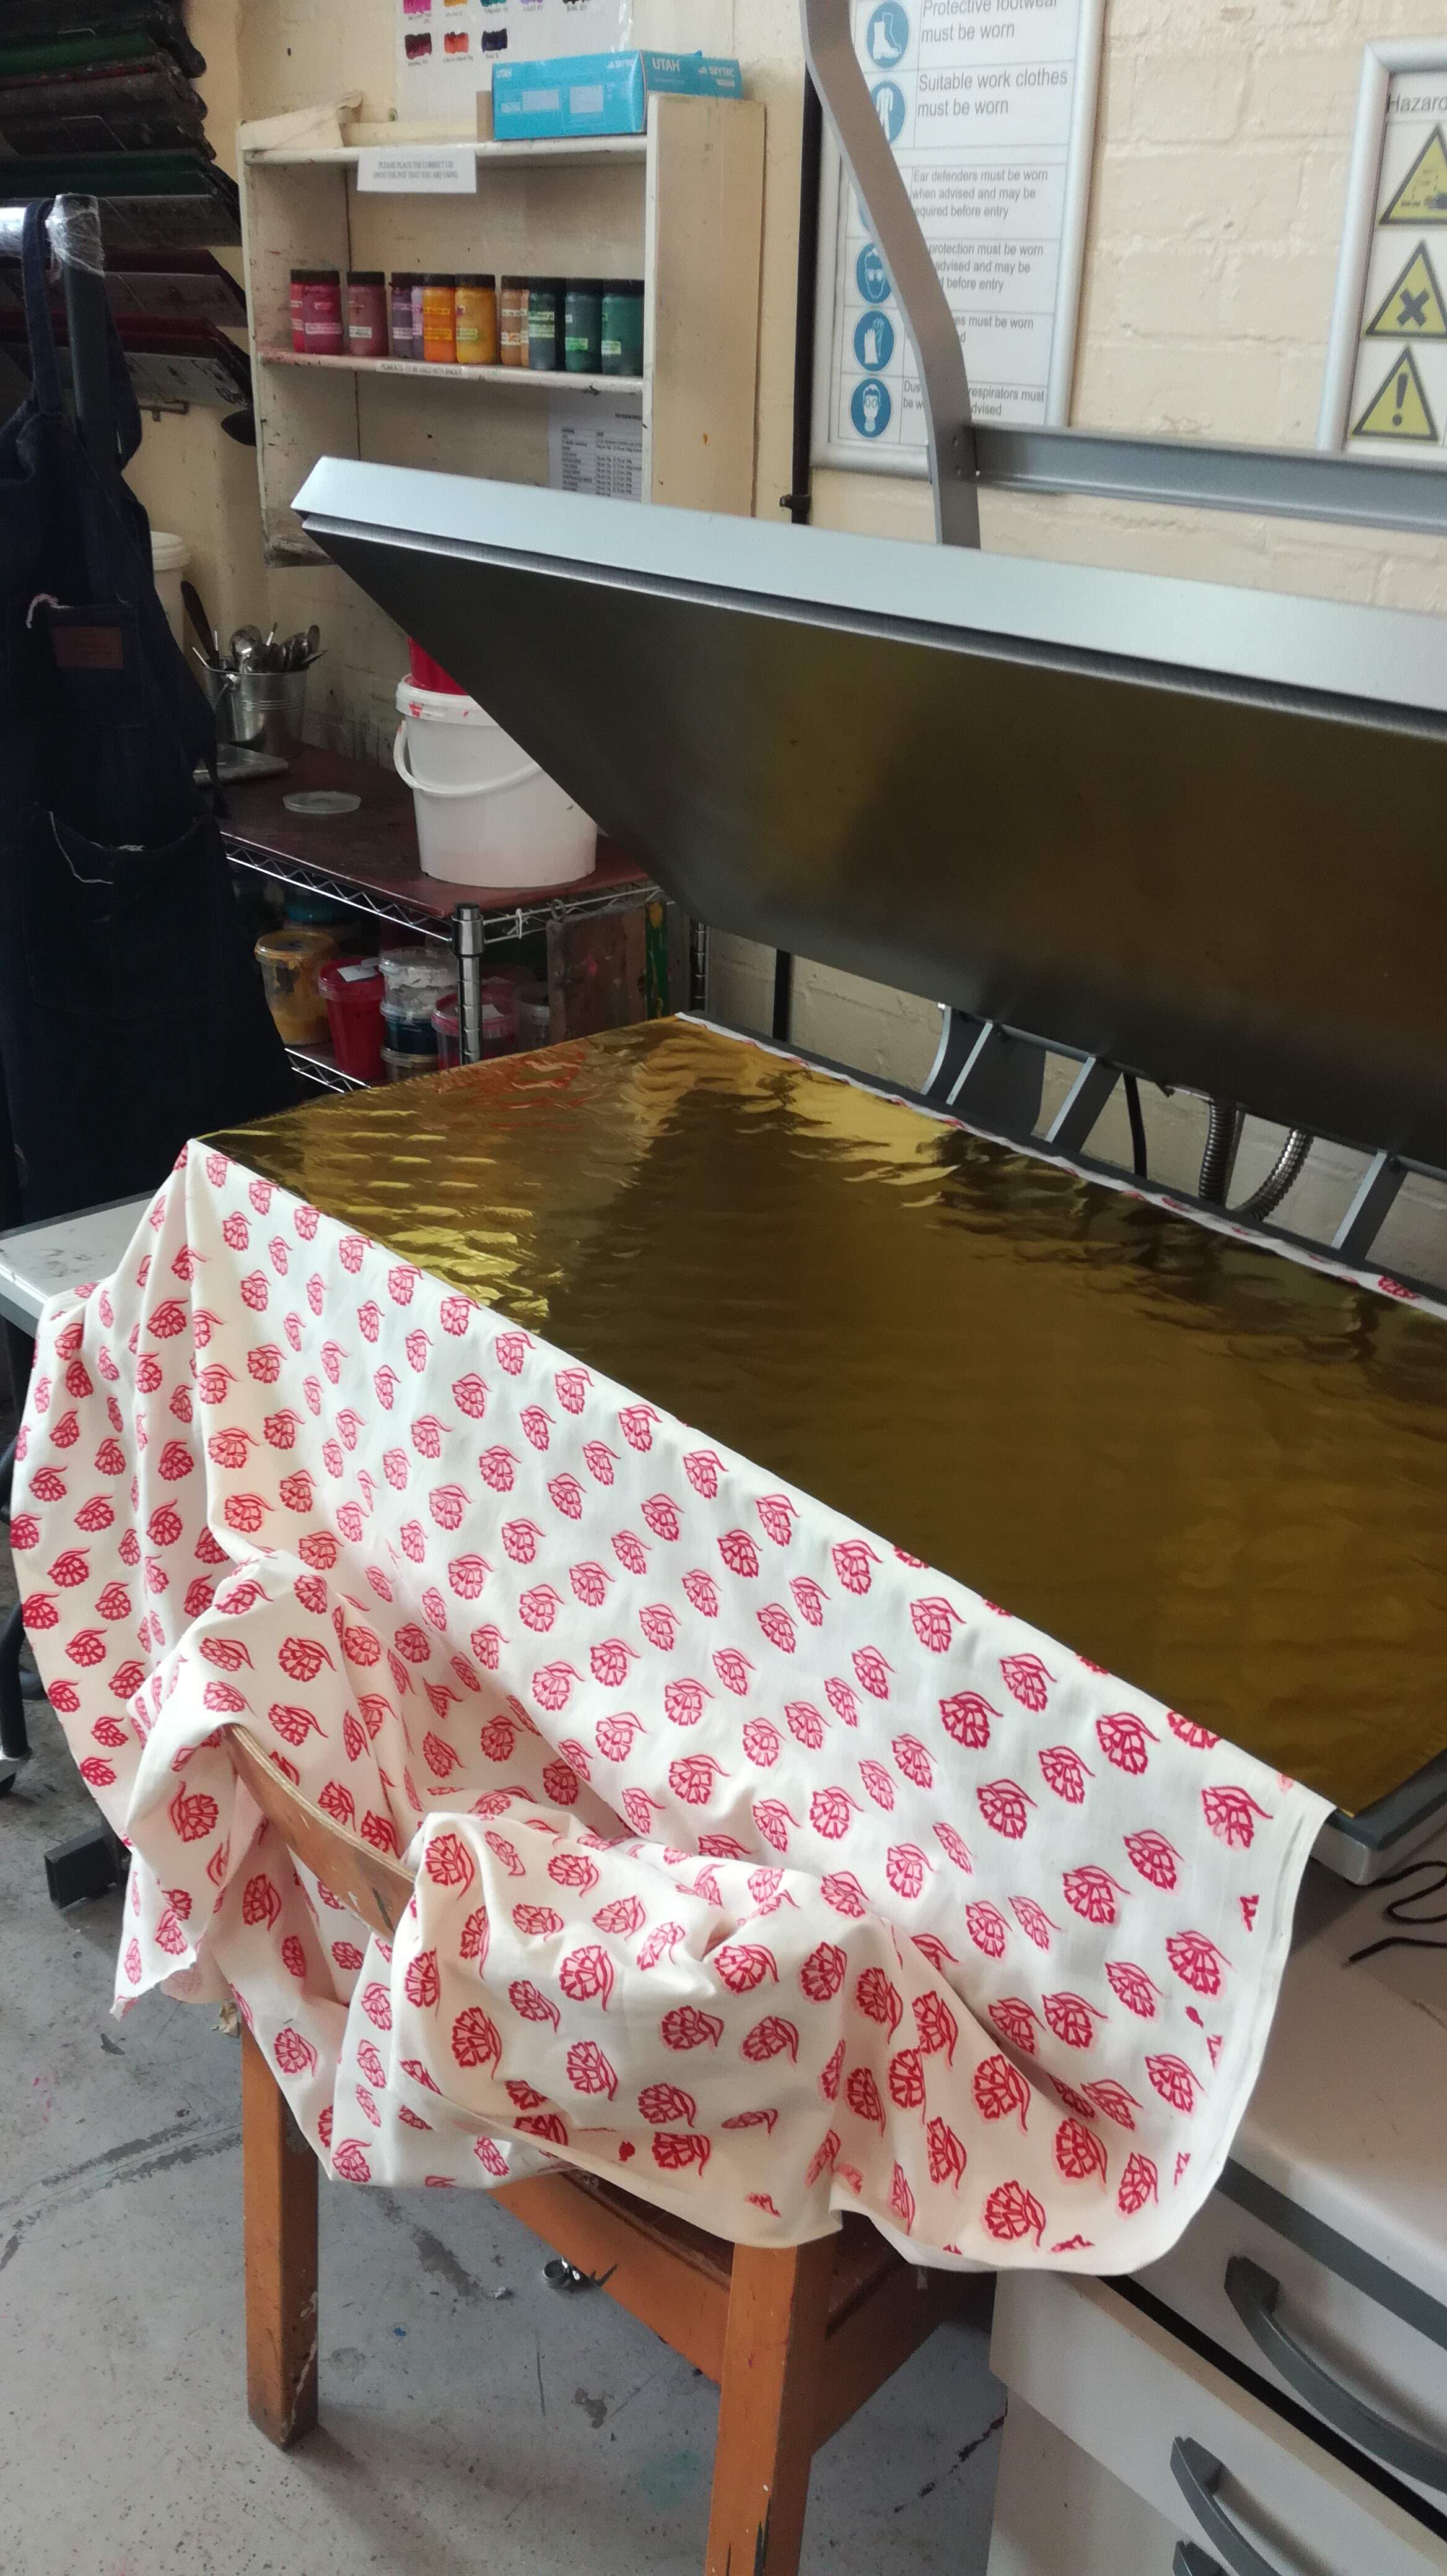 Gold foil being applied on the screenprinted fabric with the heatpress.